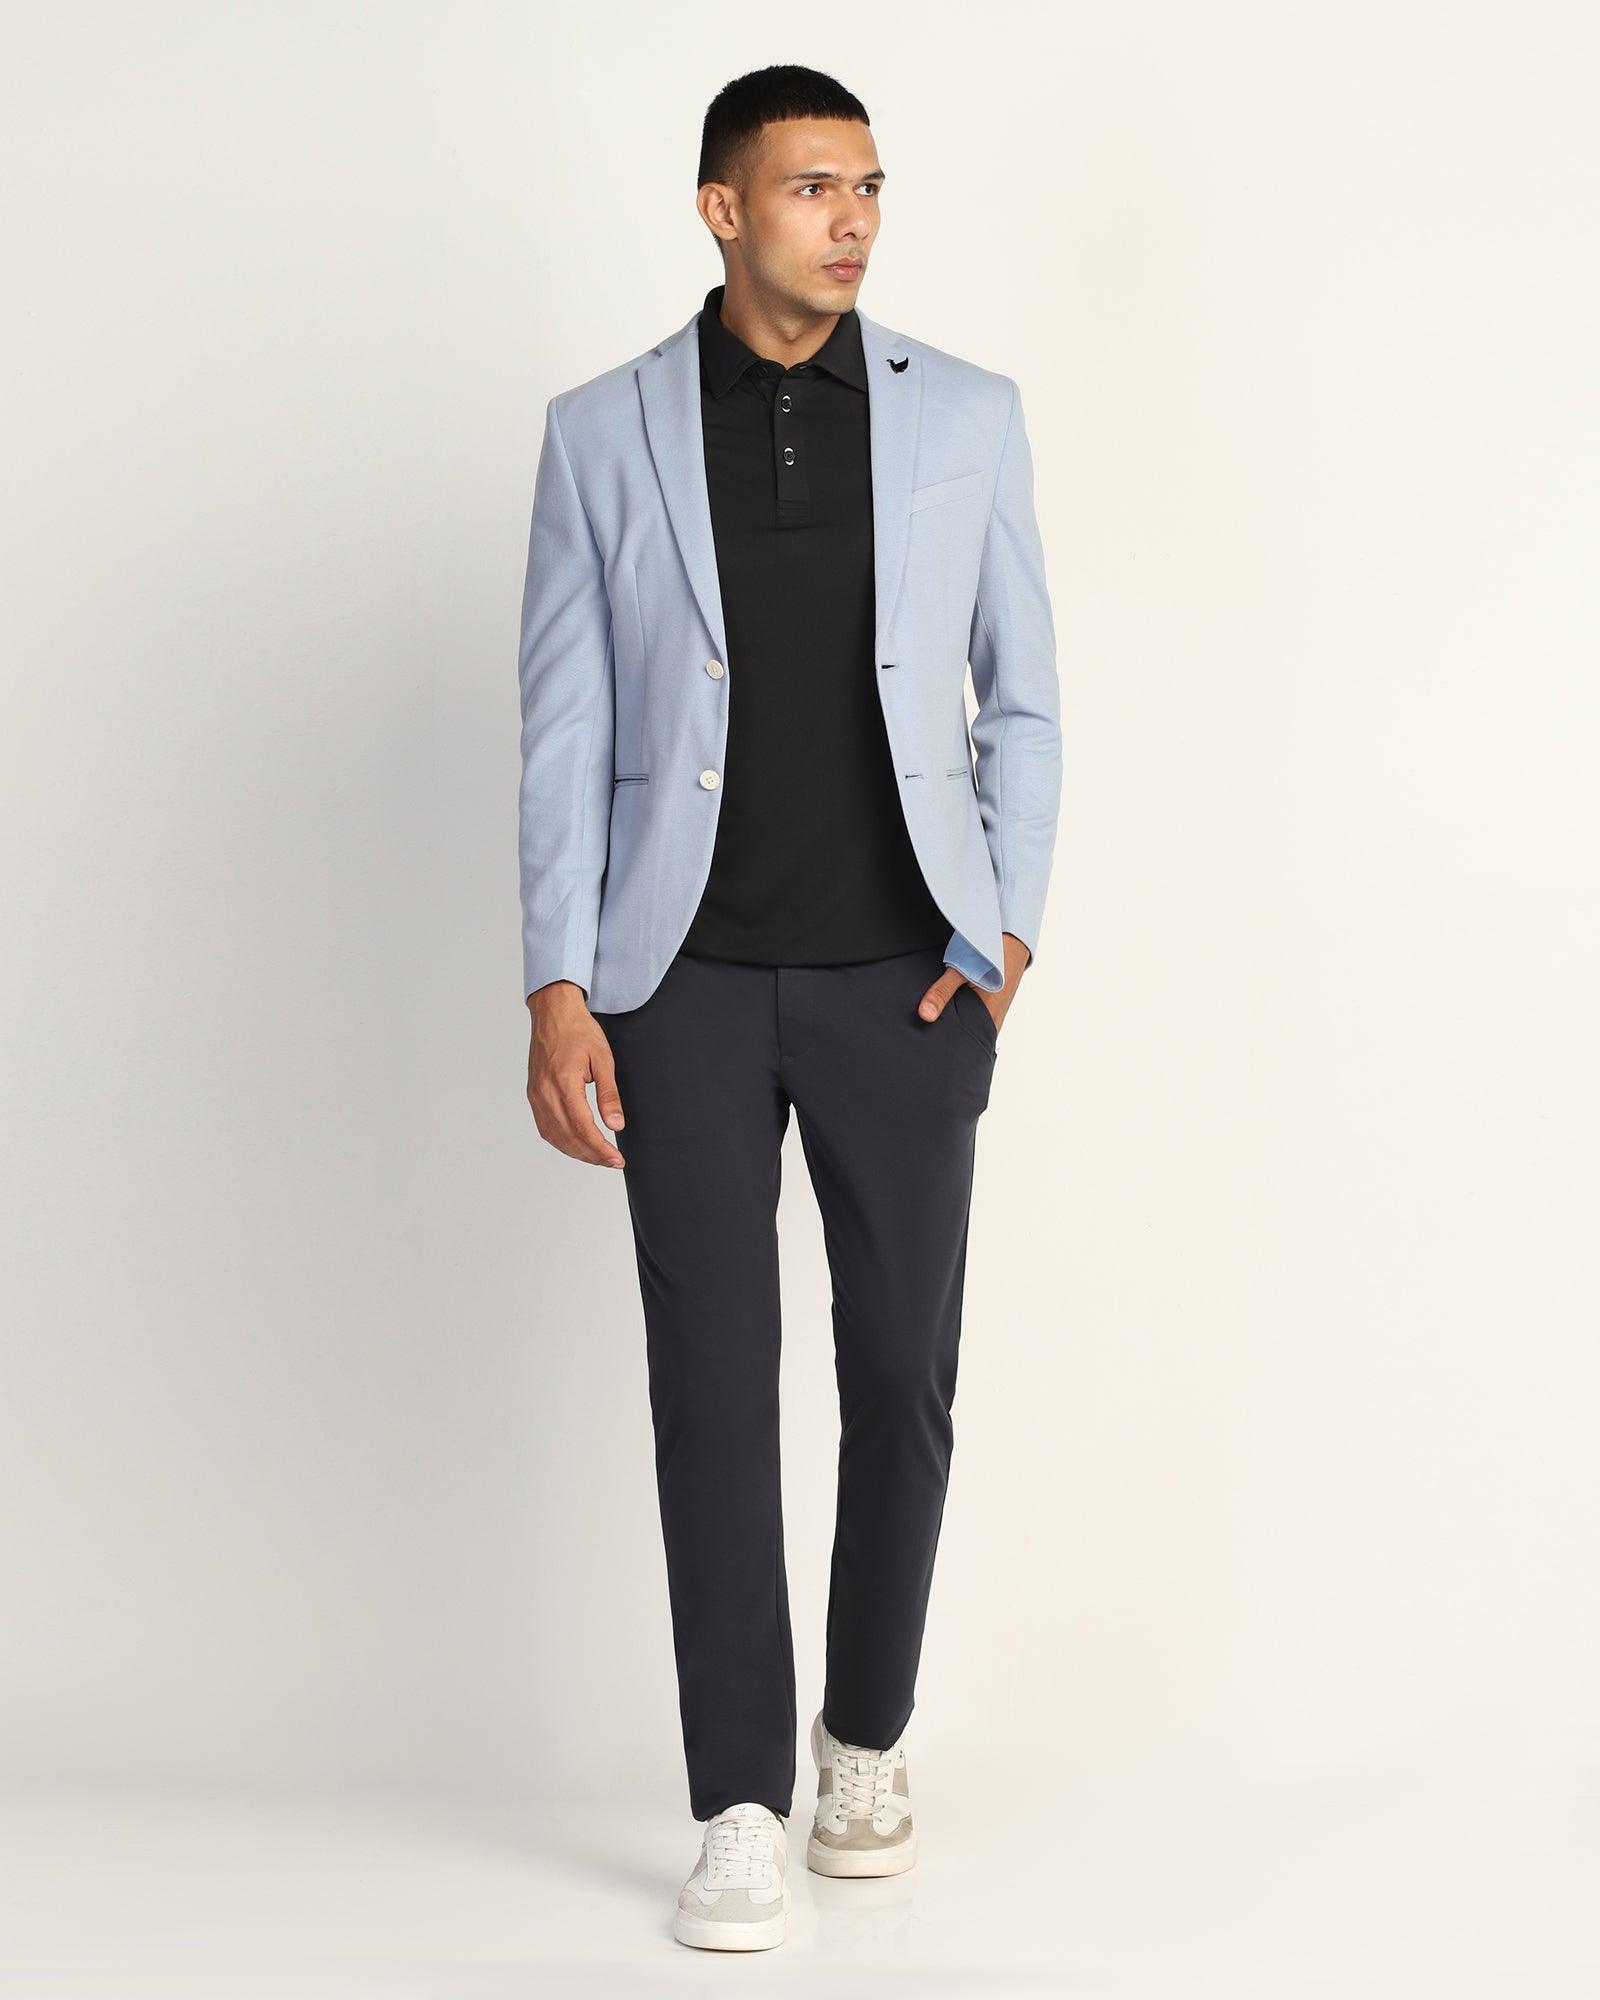 Formal look for formal days.... Black trouser paired nave blue blazer,pink  shirt and blue balorines....